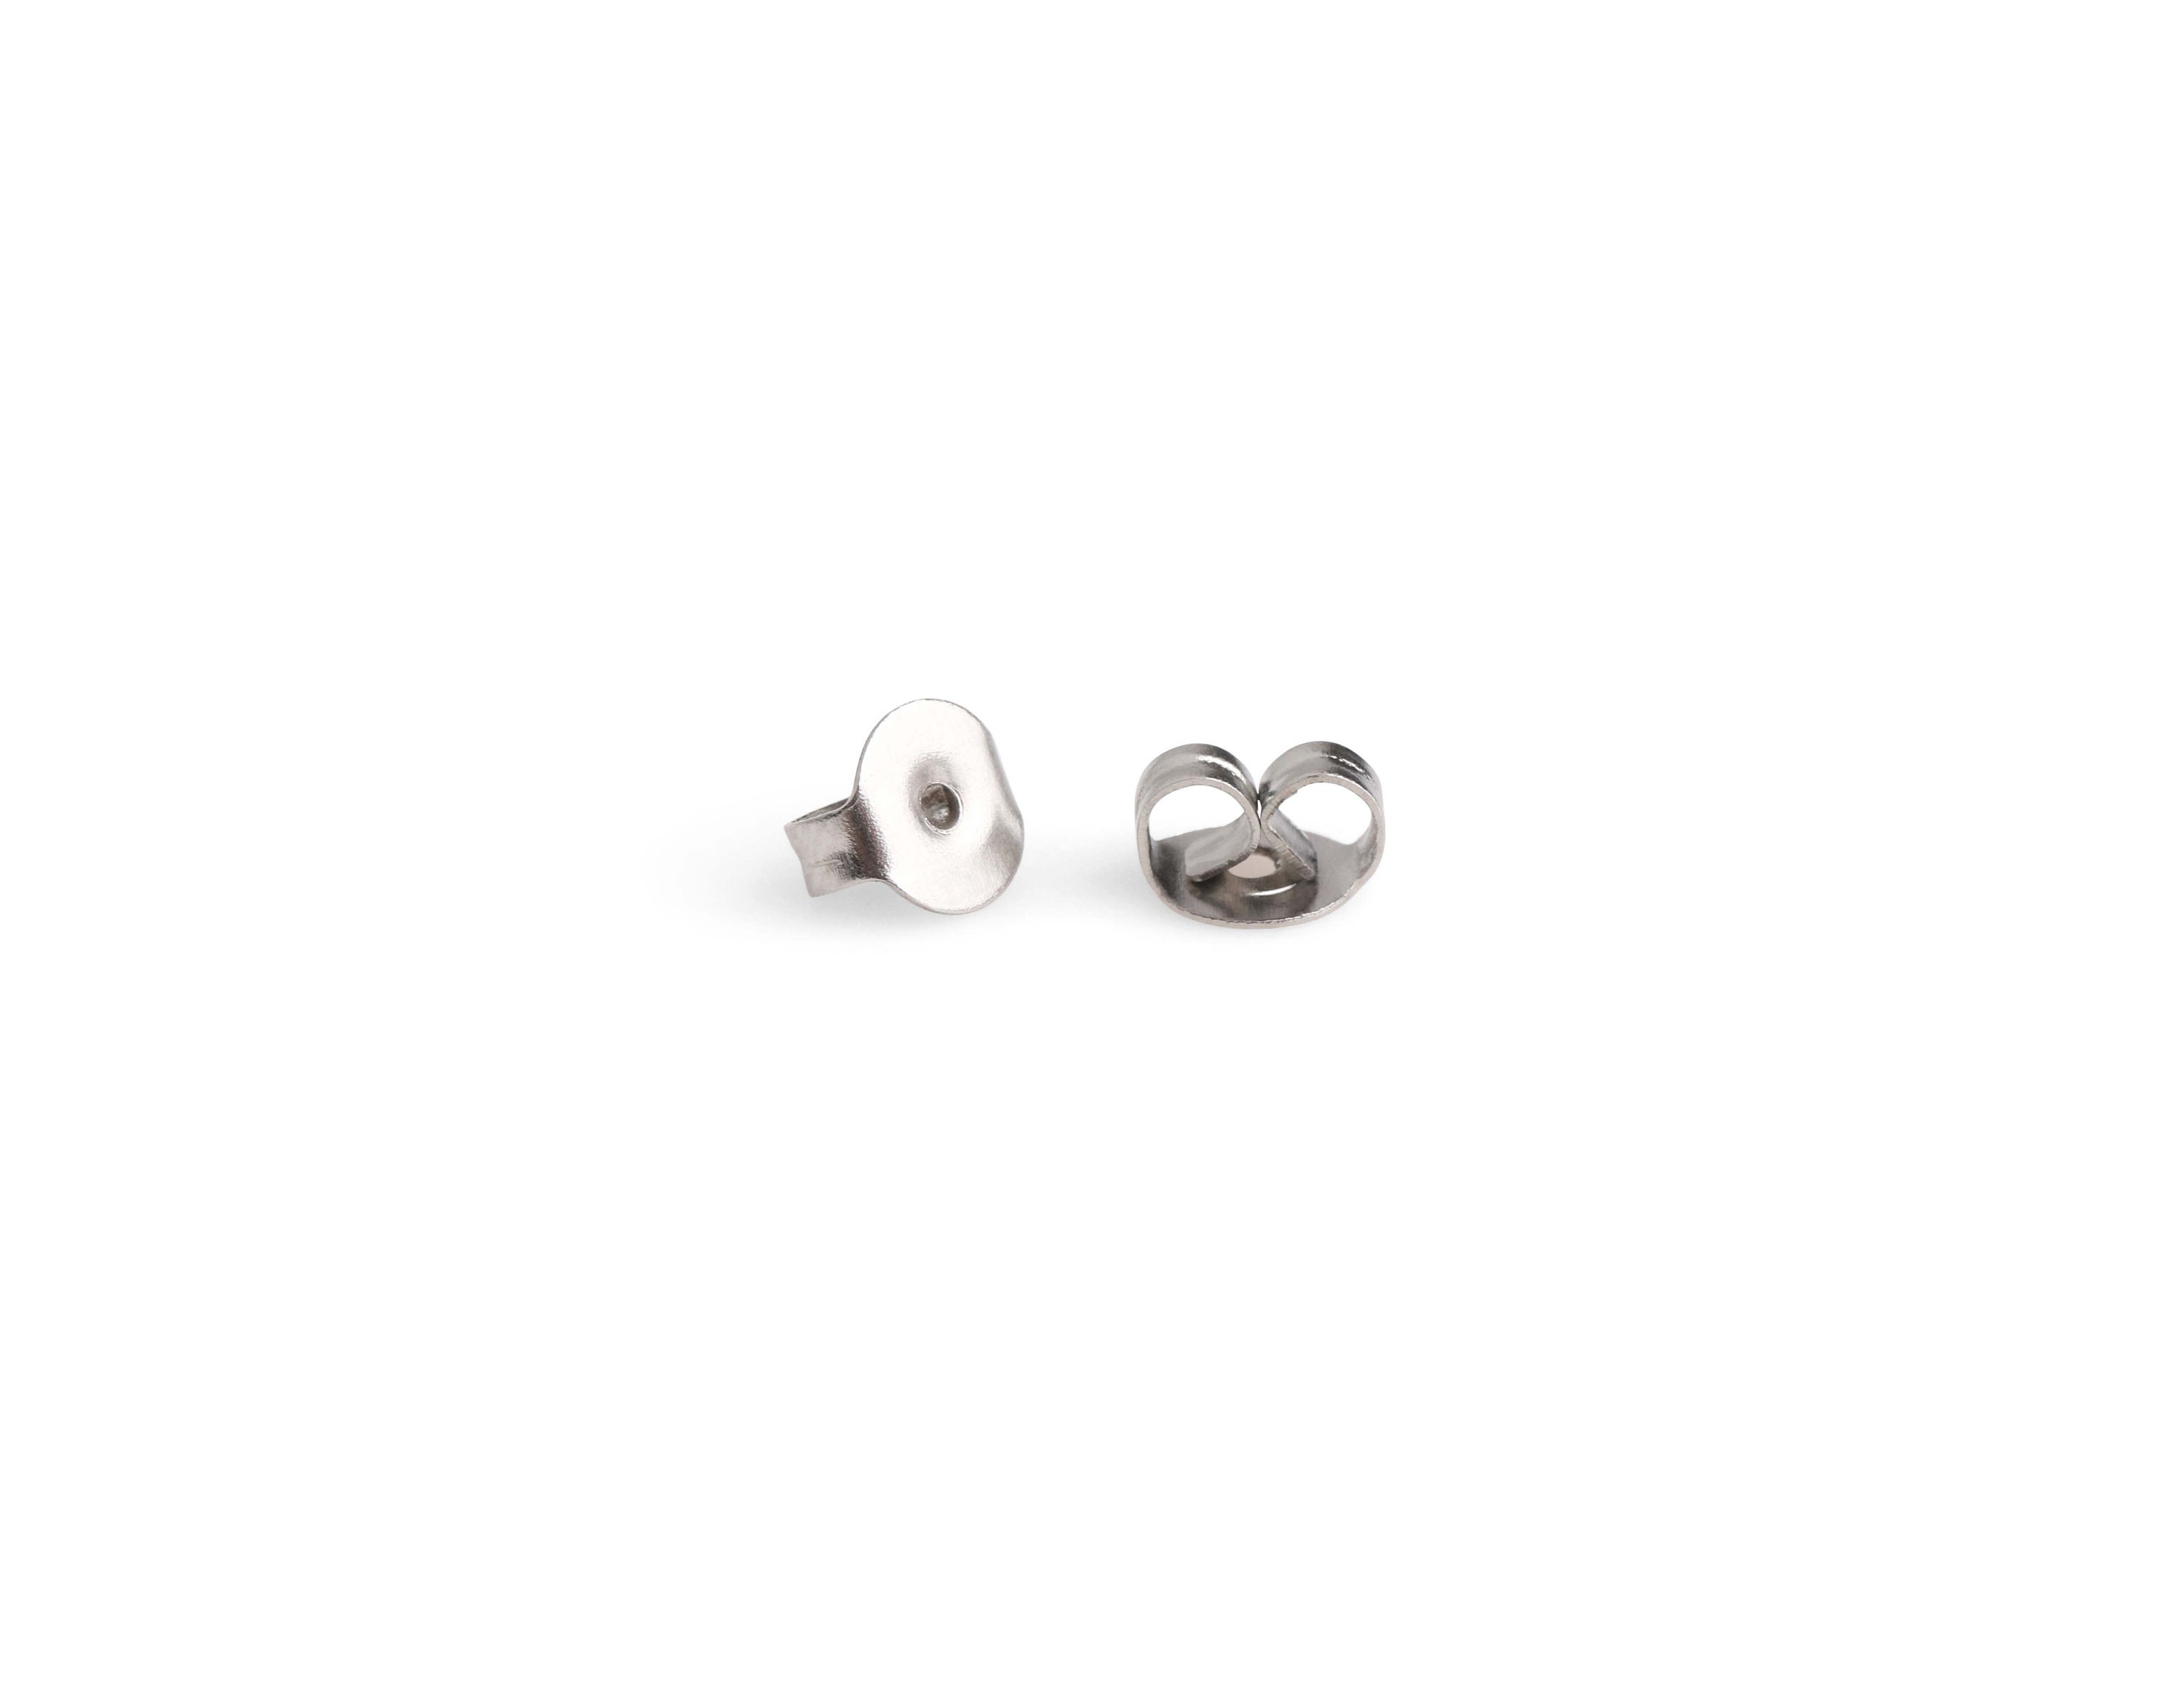 100pcs 304 Stainless Steel Ear Nut Earring Backs Replacements